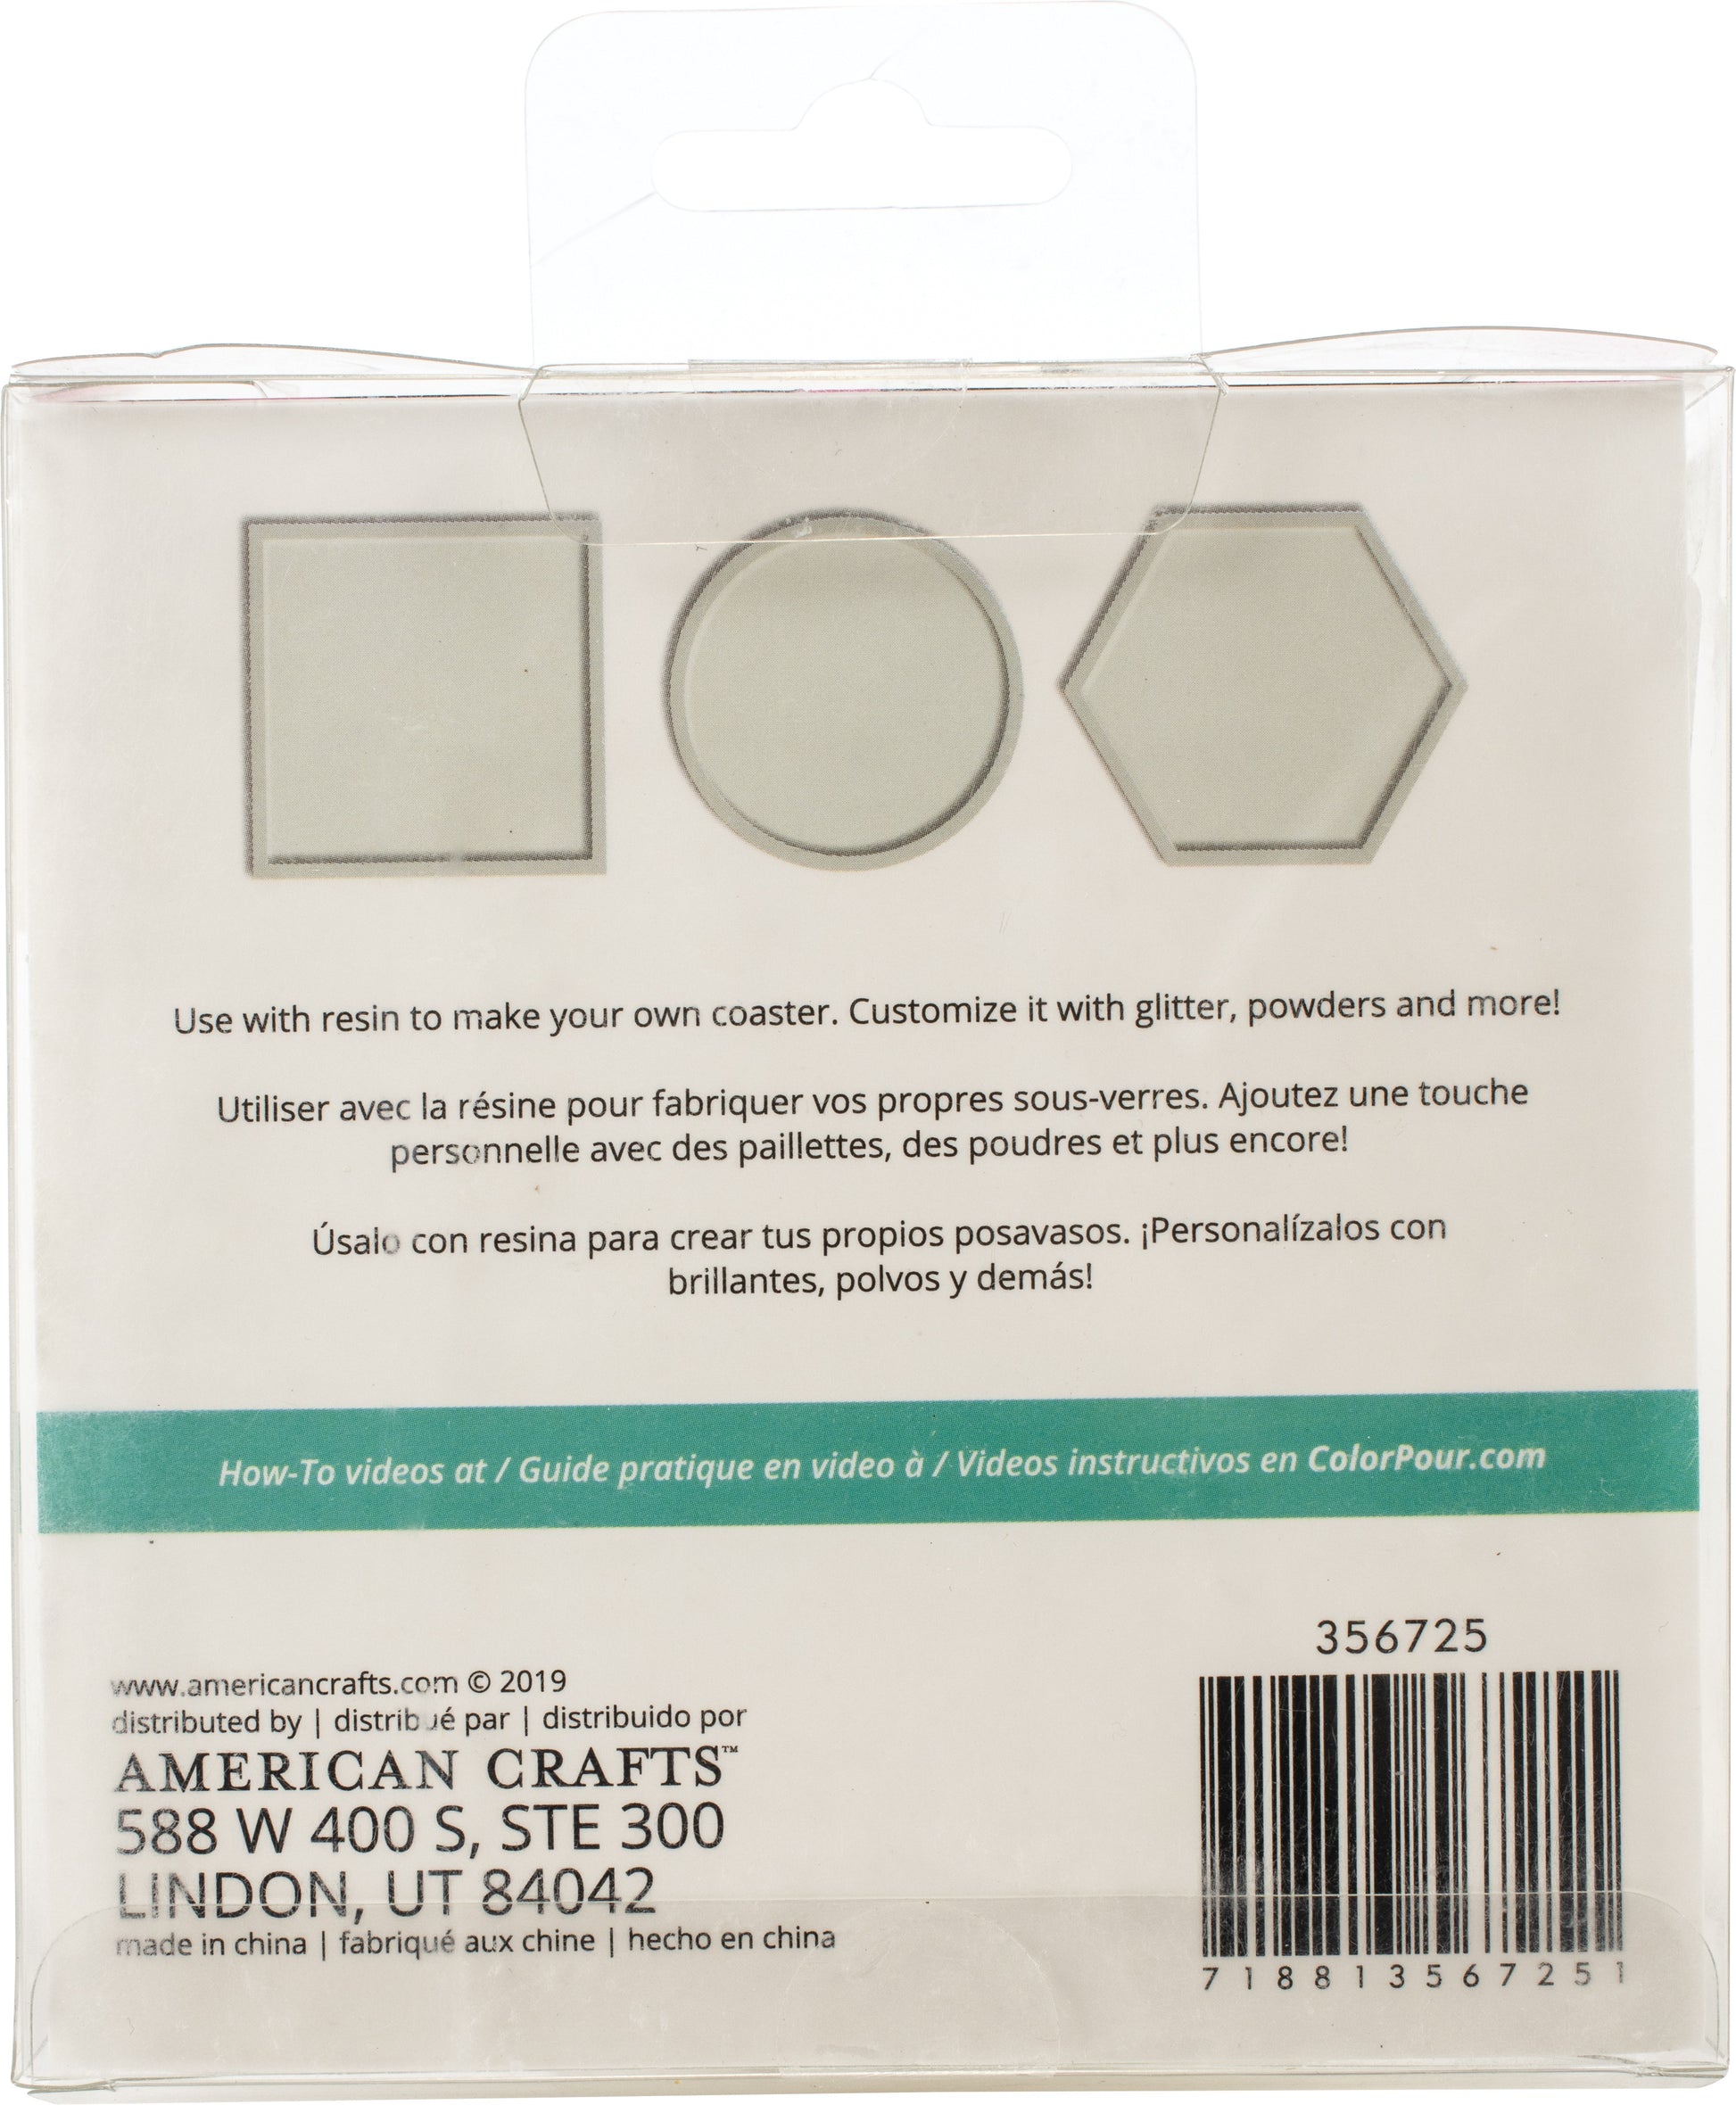 American Crafts Color Pour Resin Coaster Mold